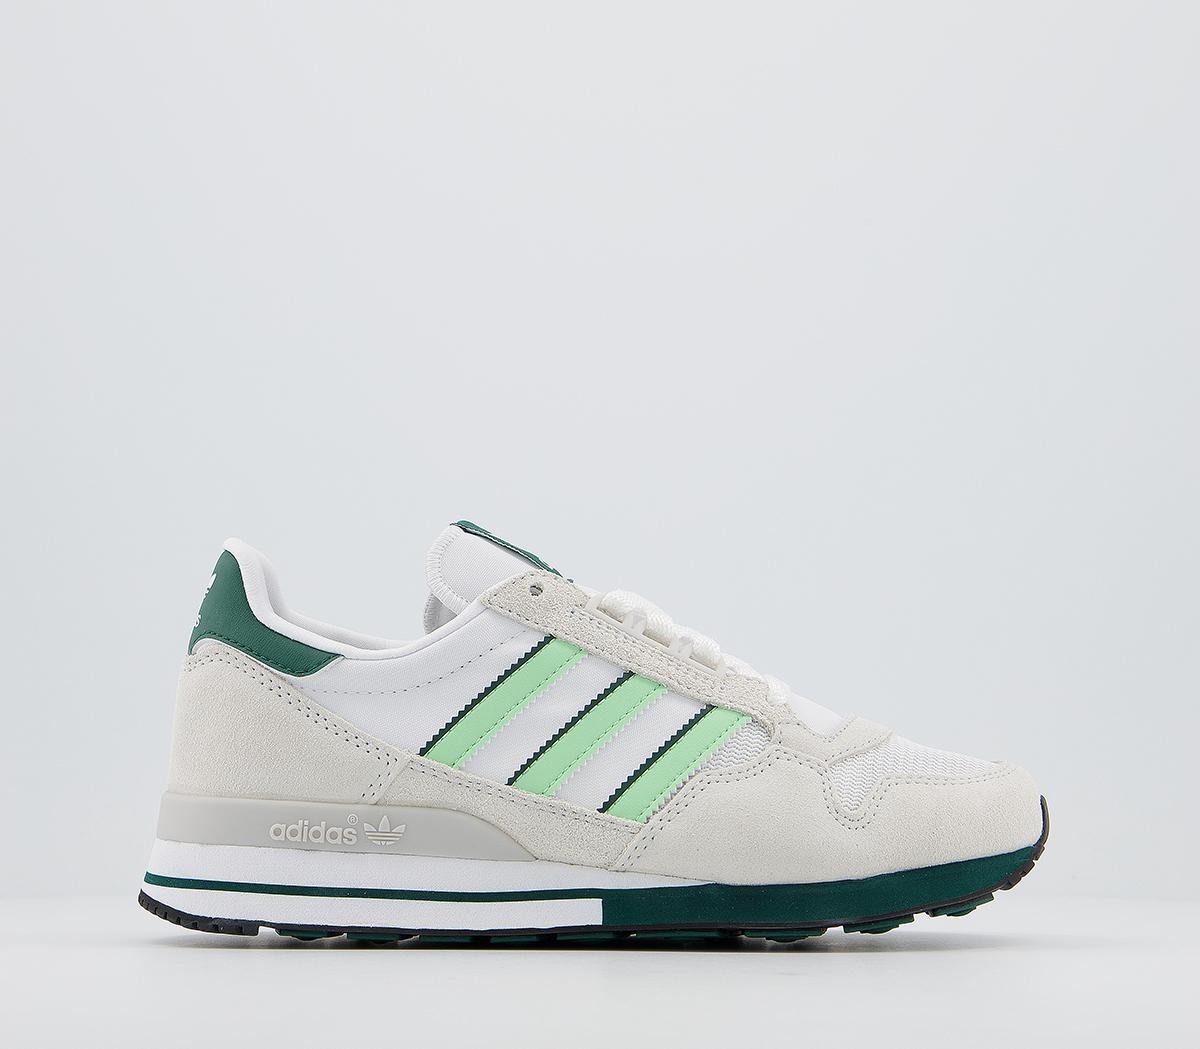 adidasZx 500 TrainersCrystal White Glory Mint White